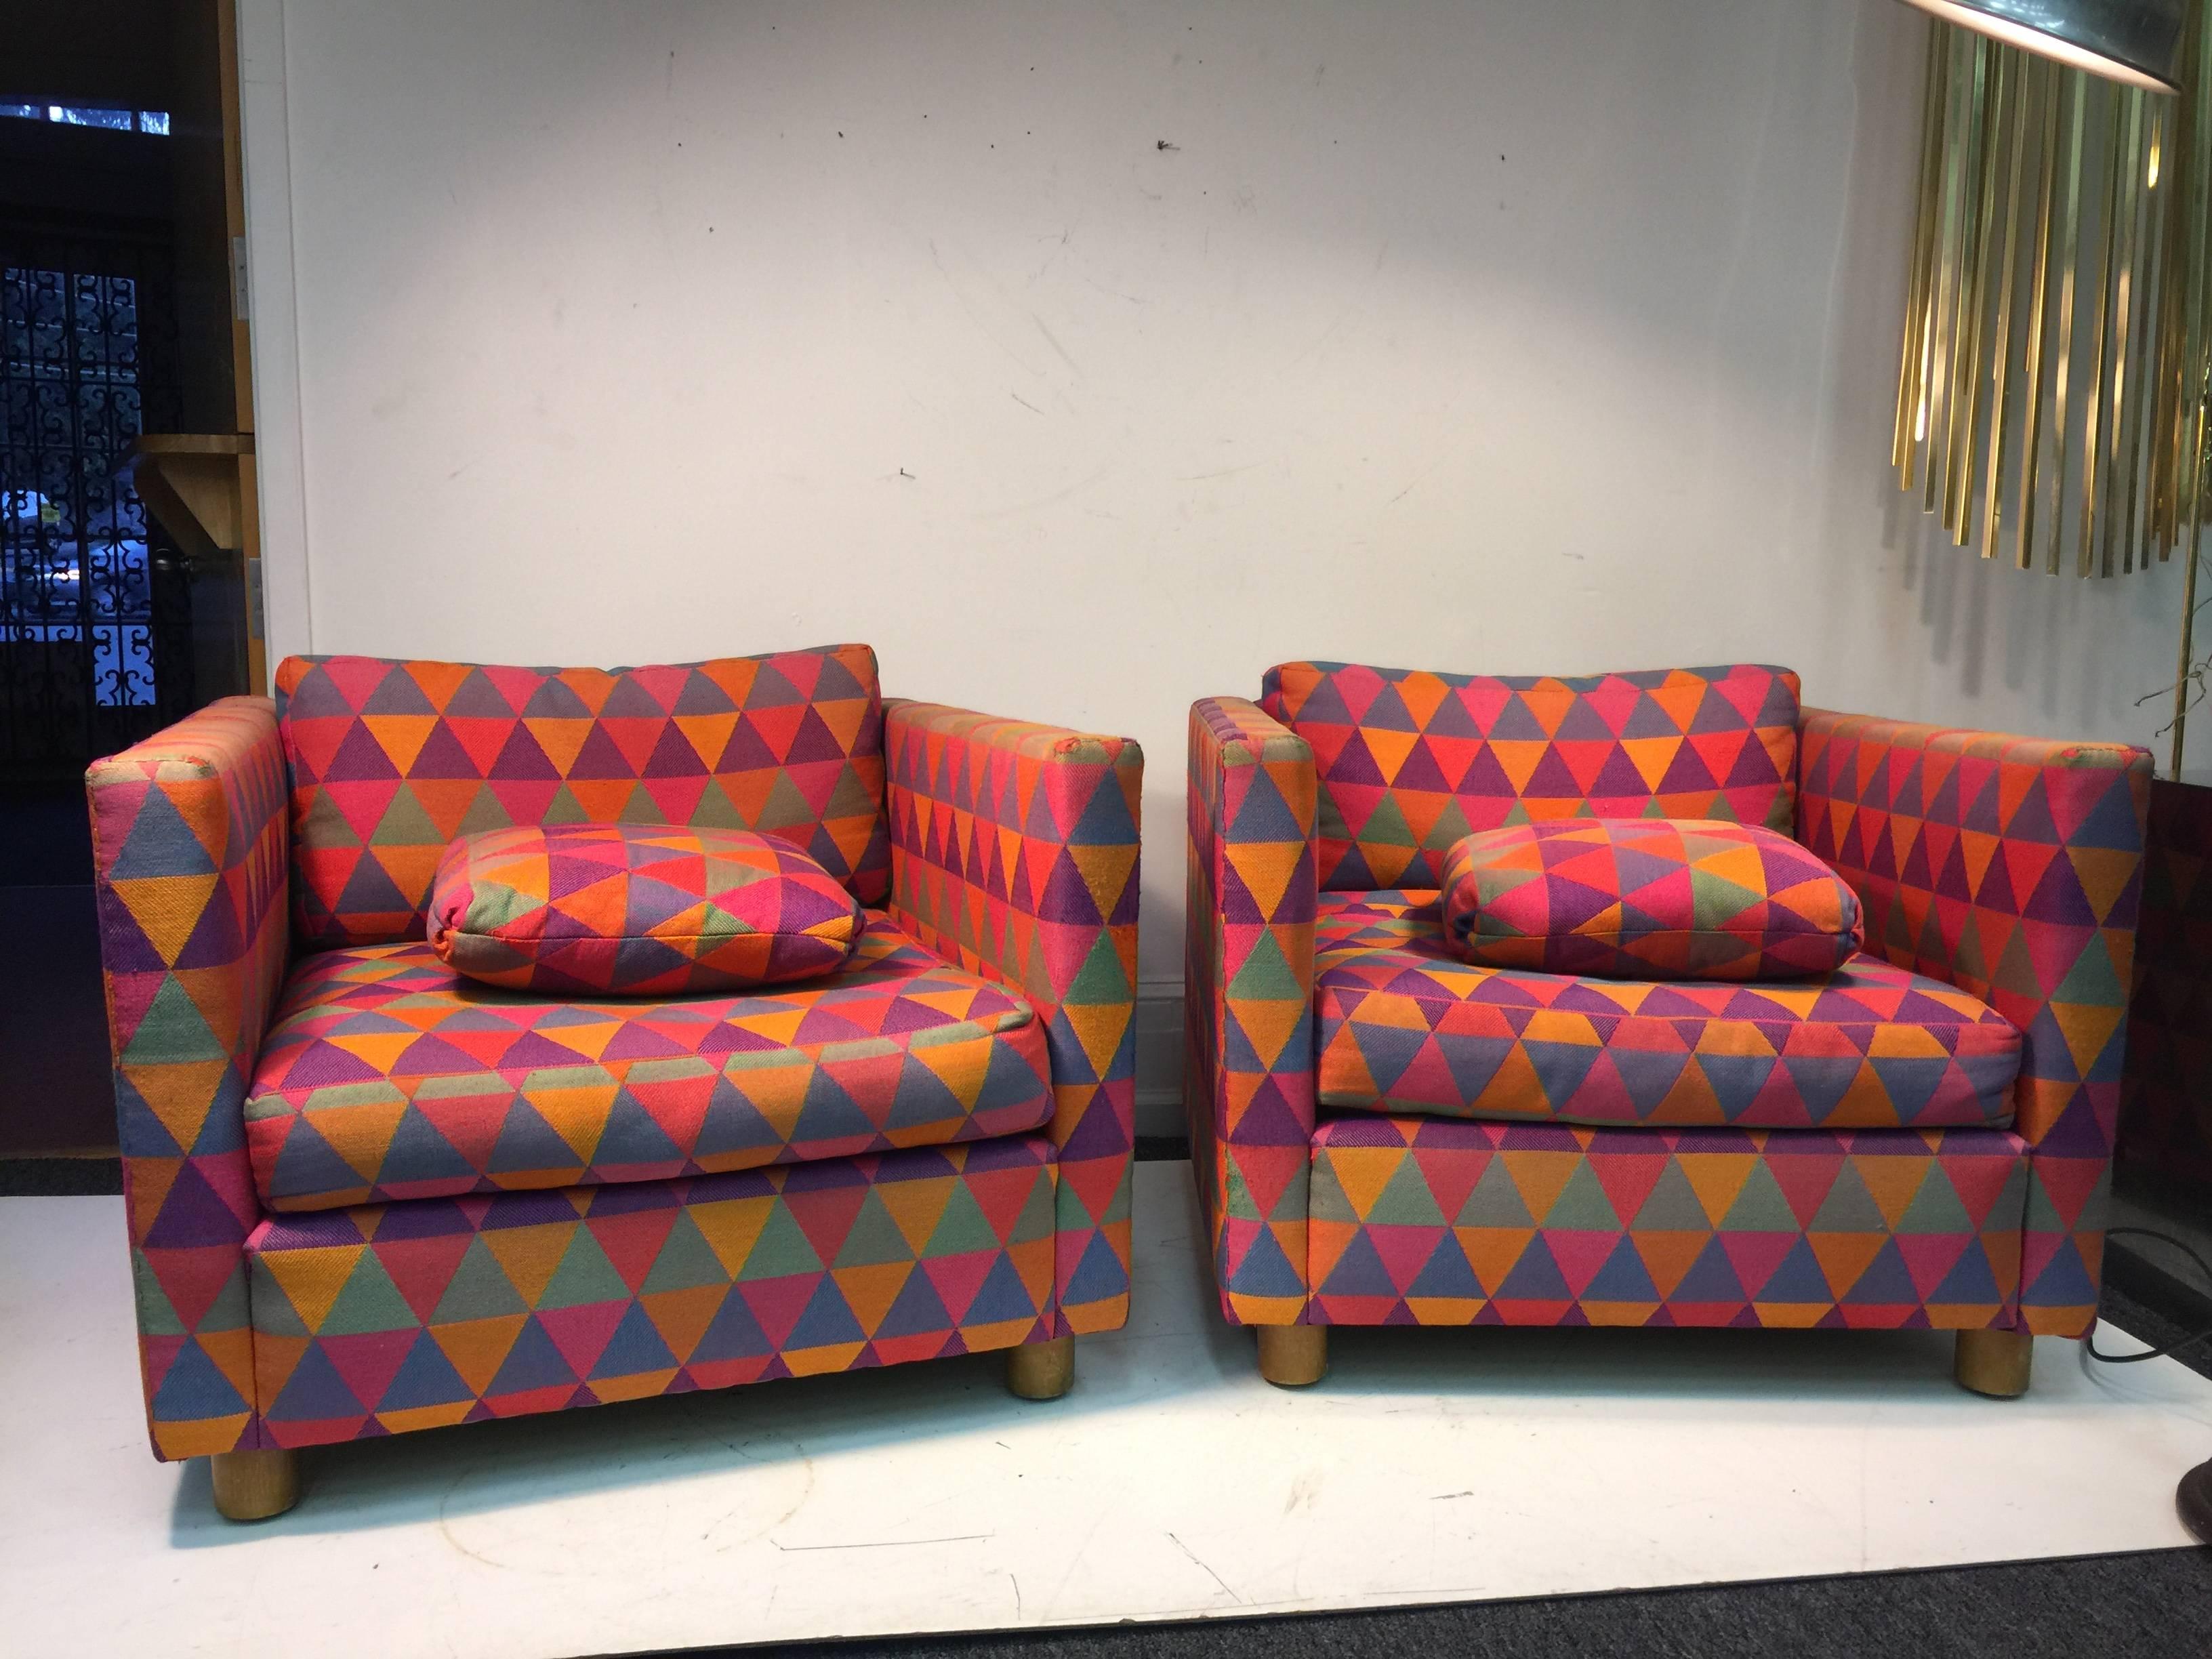 A fabulous pair of 1970s club chairs attributed to Harvey Probber in colorful, vintage, geometric patterned Larsen fabric.